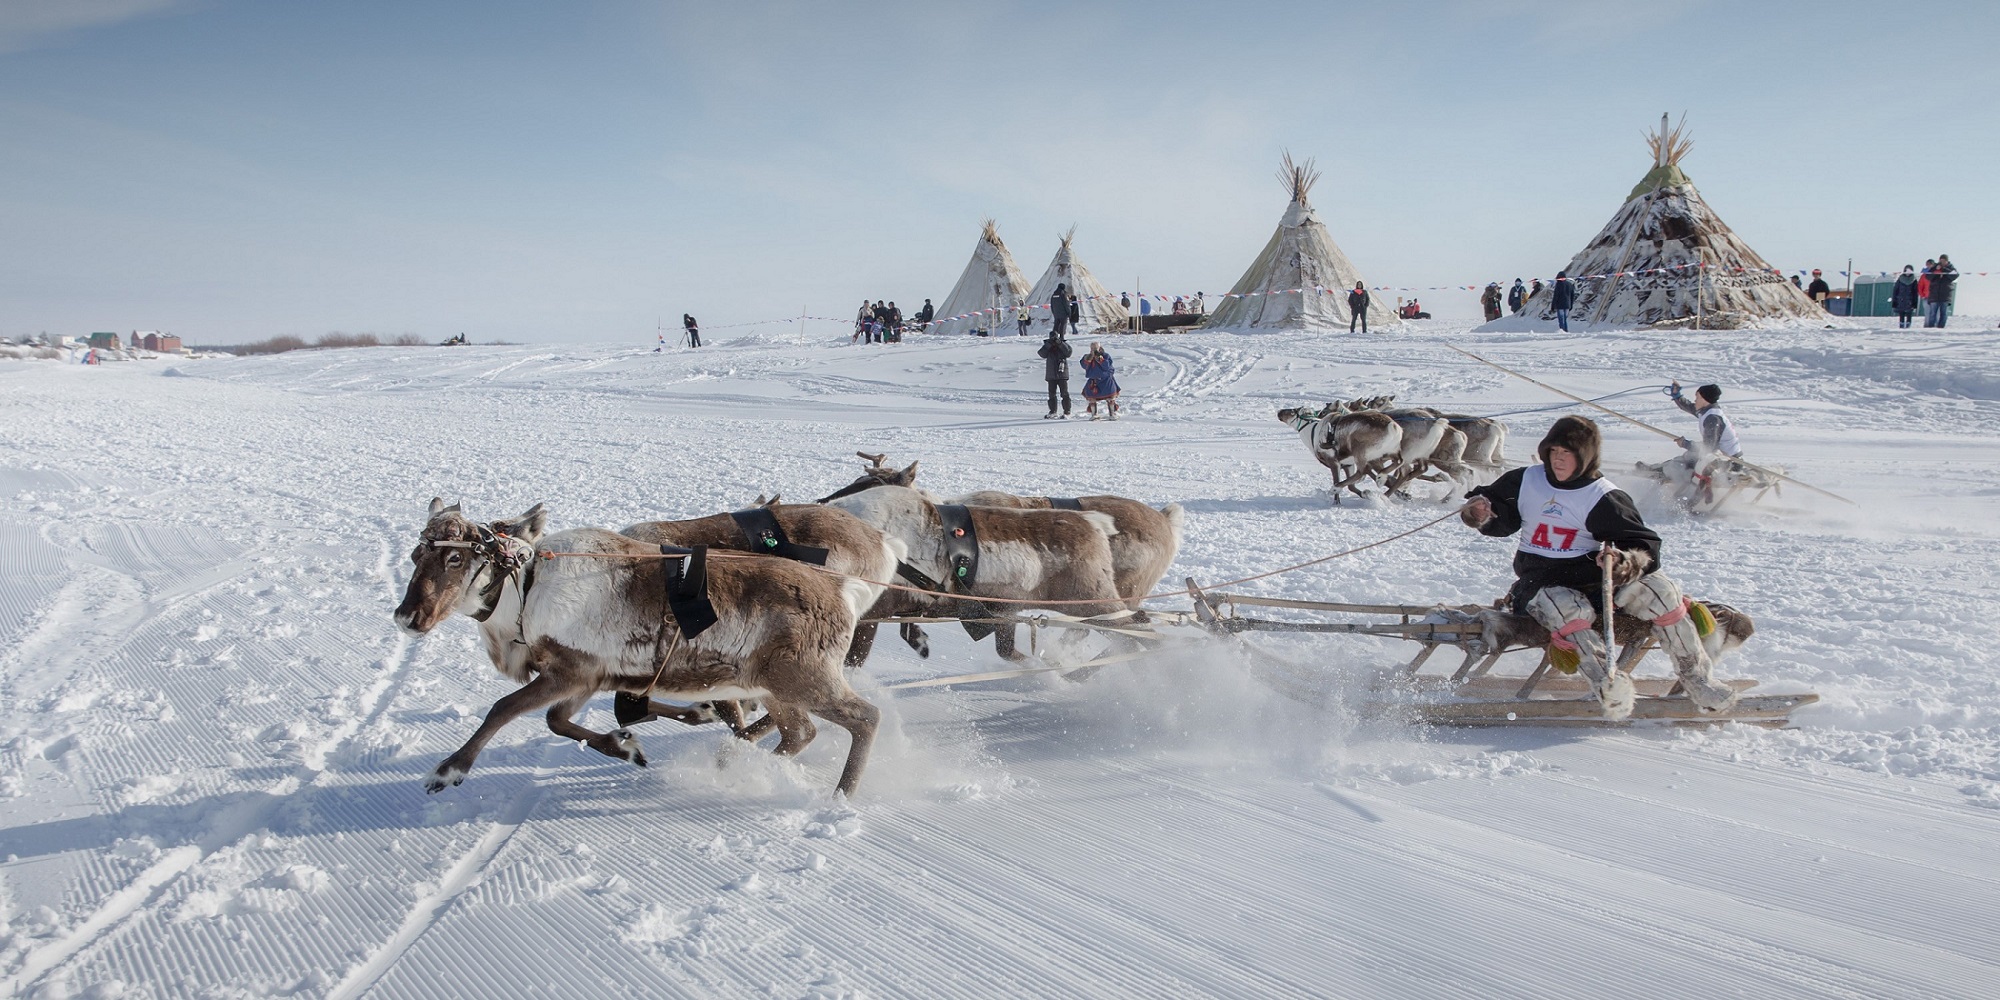 A Nenets rides a sled during a reindeer race on the Reindeer Herders’ Day in the city of Nadym, in Yamal-Nenets Region, 2500 kilometres northeast of Moscow, Russia on March 28, 2016.